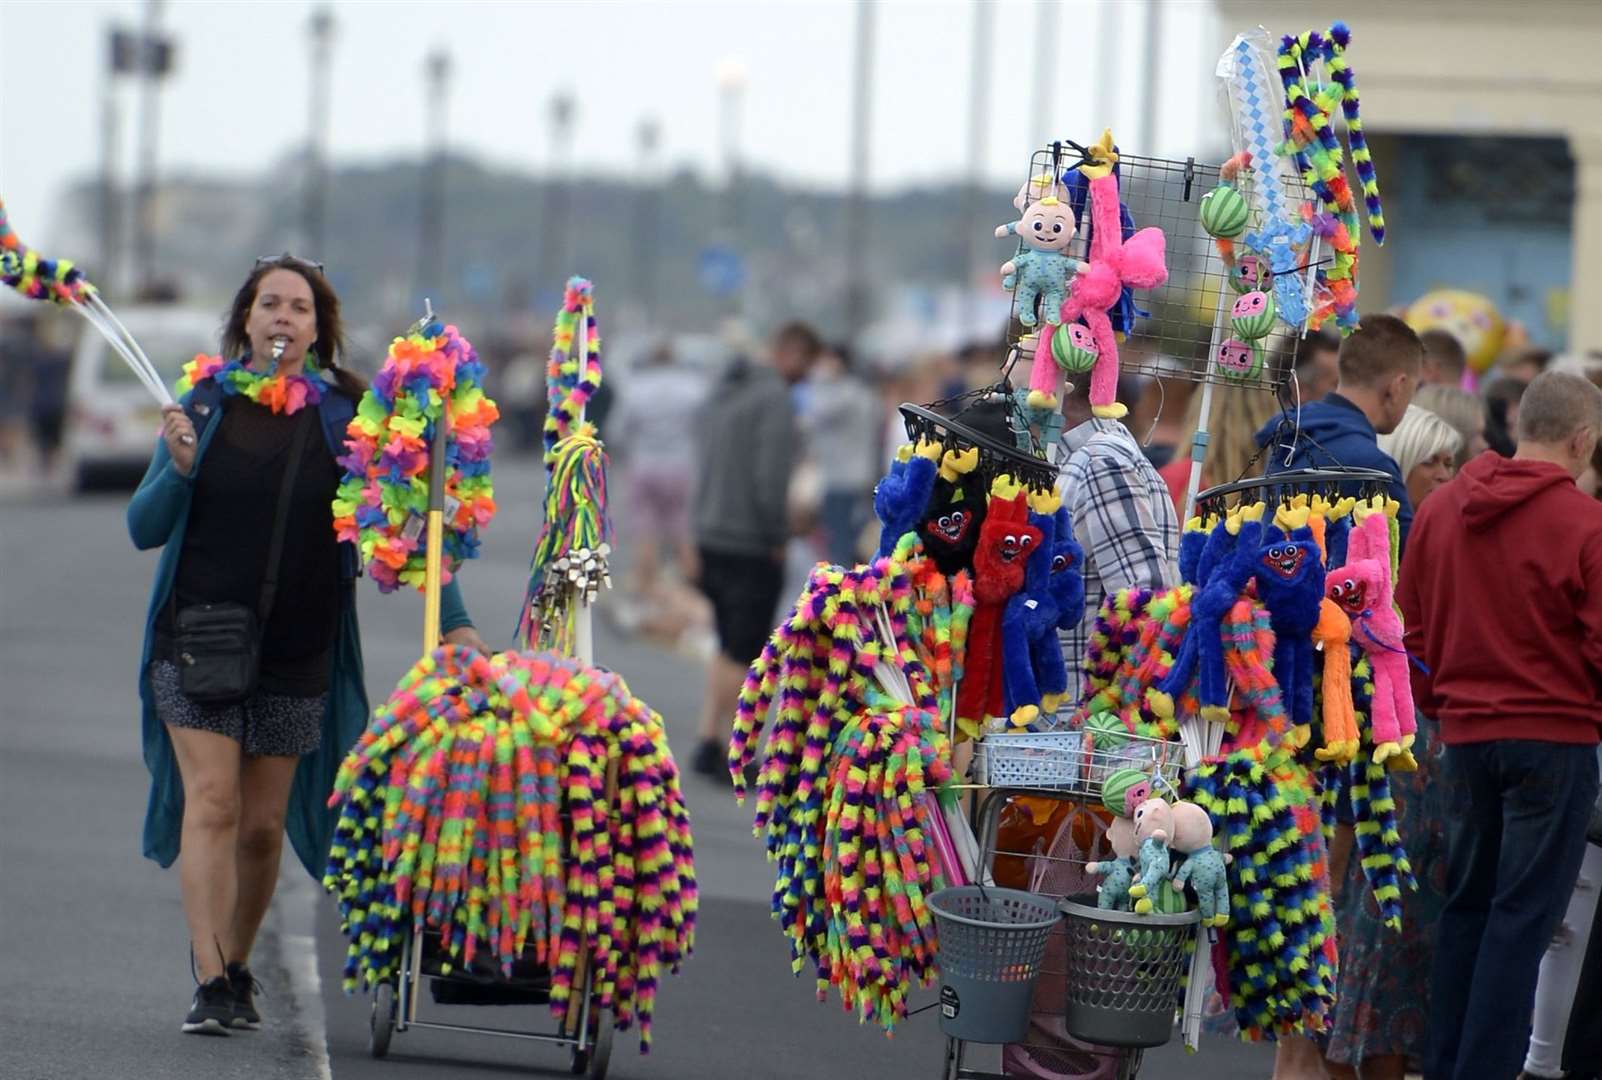 All sorts of fun things were available to buy from the street vendors to help make the carnival brighter. Picture: Barry Goodwin